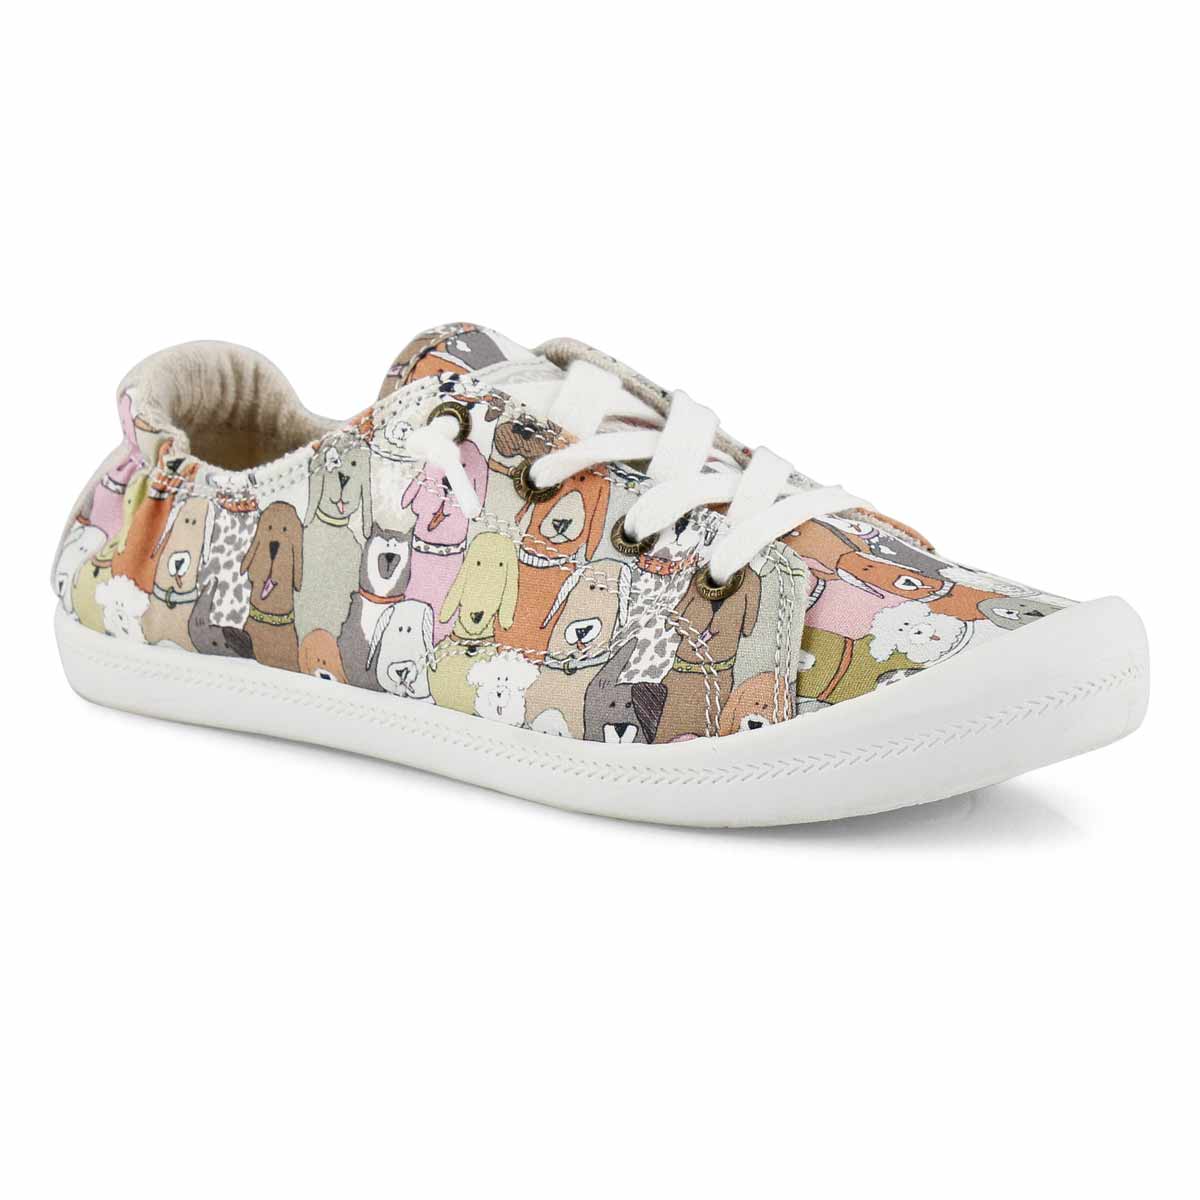 bobs for dogs women's shoes